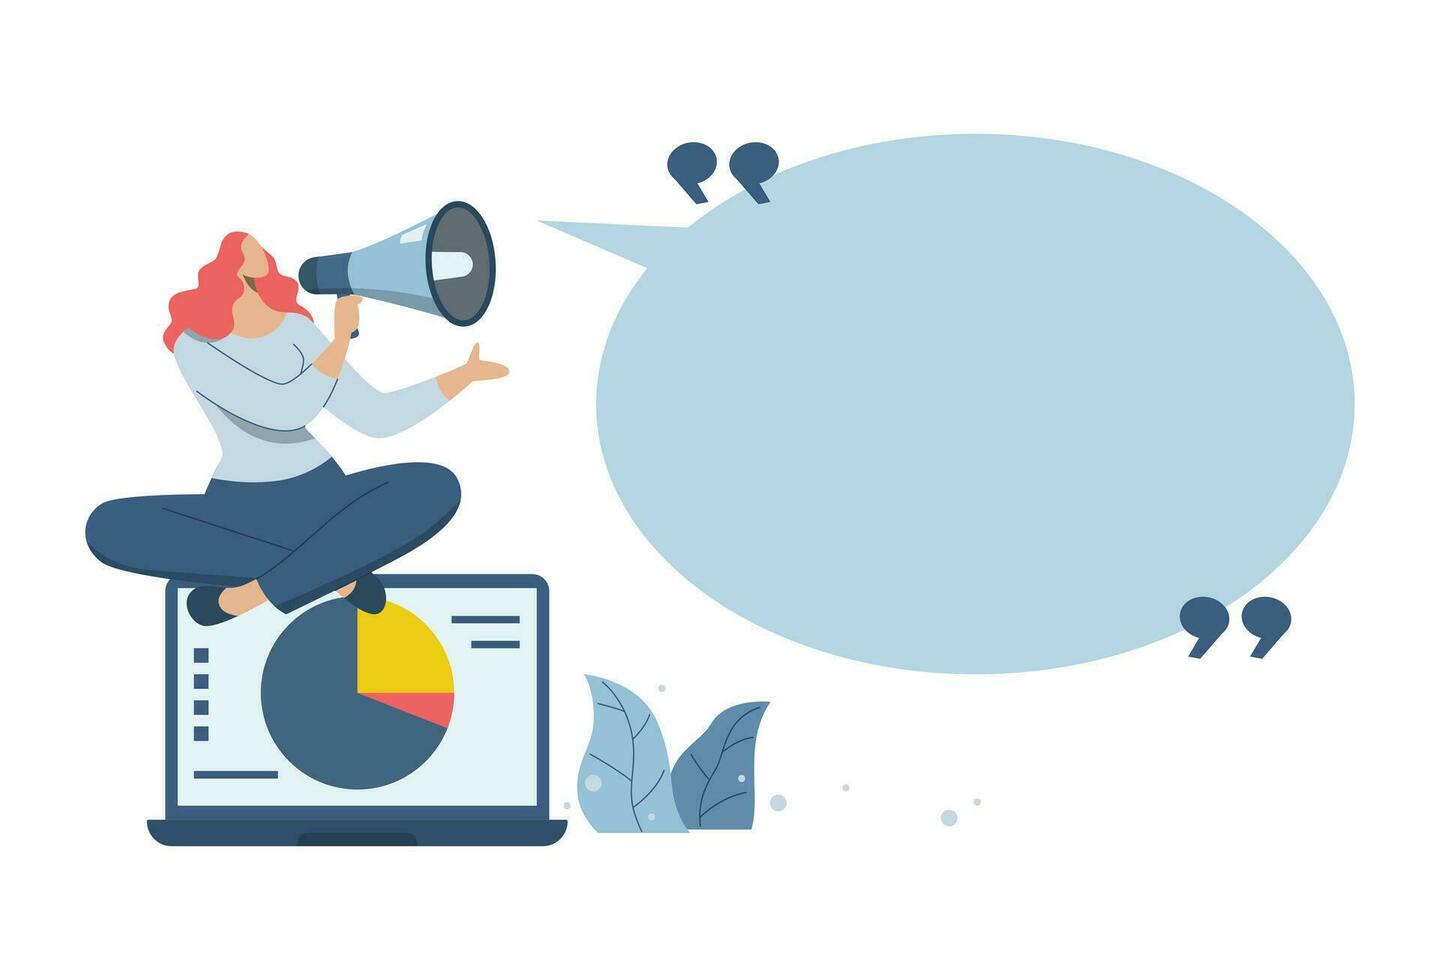 Important announcements, advertisements from company to make organization or important target groups aware. Empty space for text or talking business concept. Business woman using megaphone to speech. vector